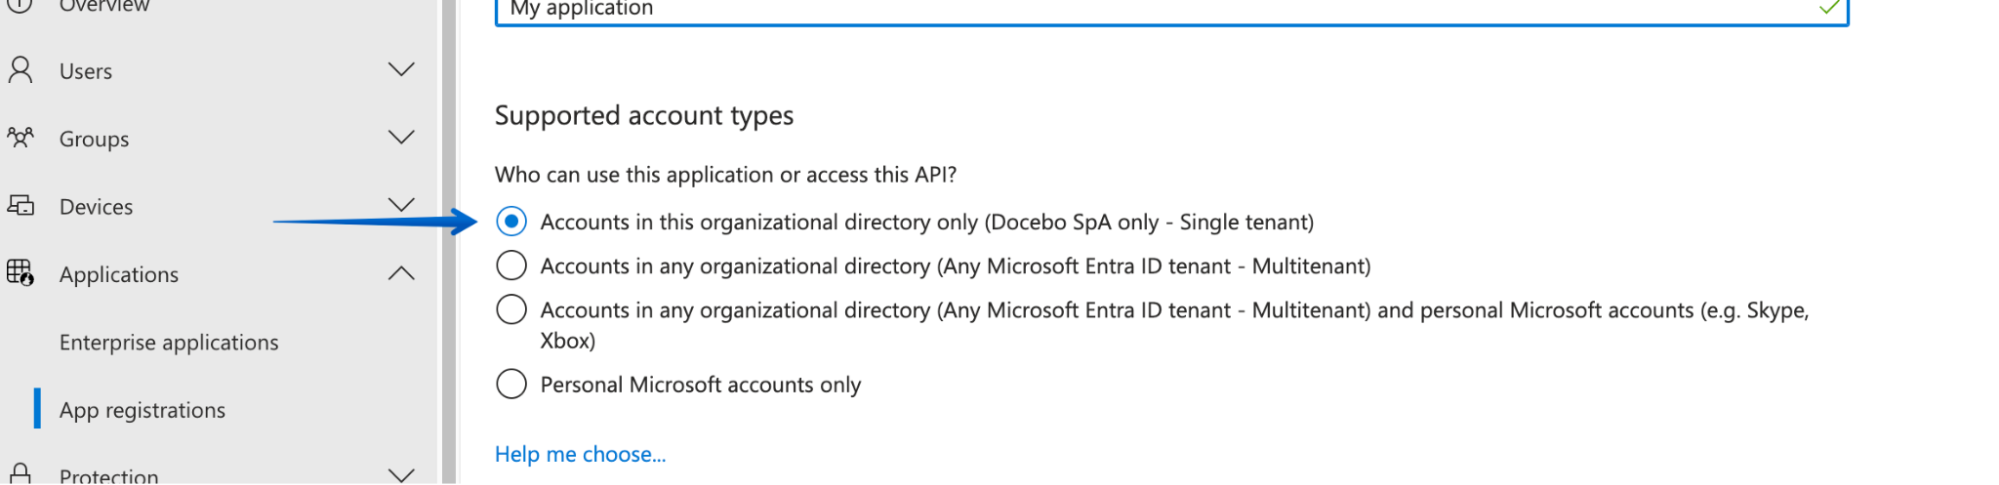 Selecting Accounts in this organizational directory only for the Supported accounts types in Microsoft Teams